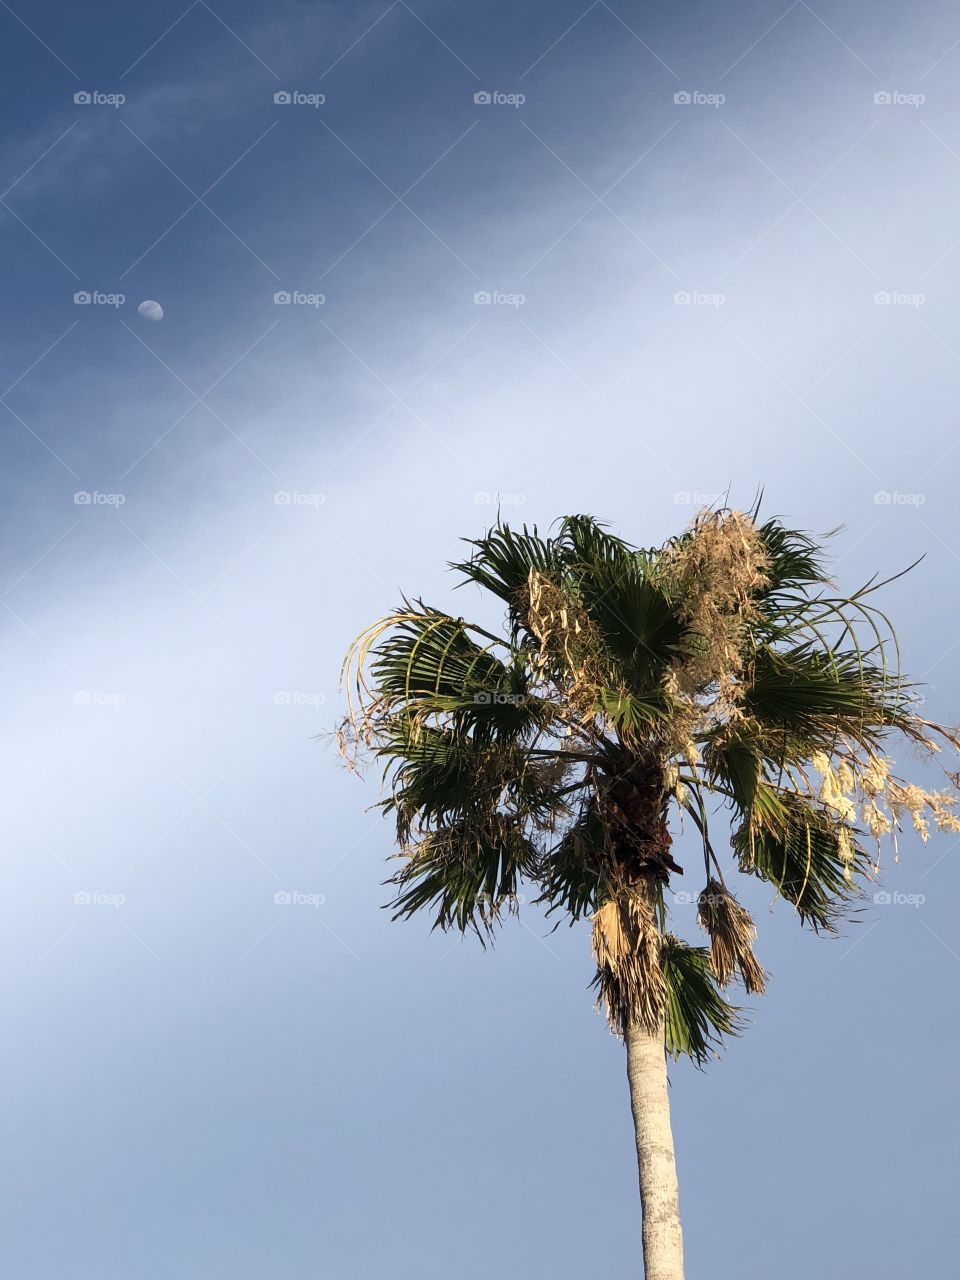 Palm tree, half moon, and a layer of clouds